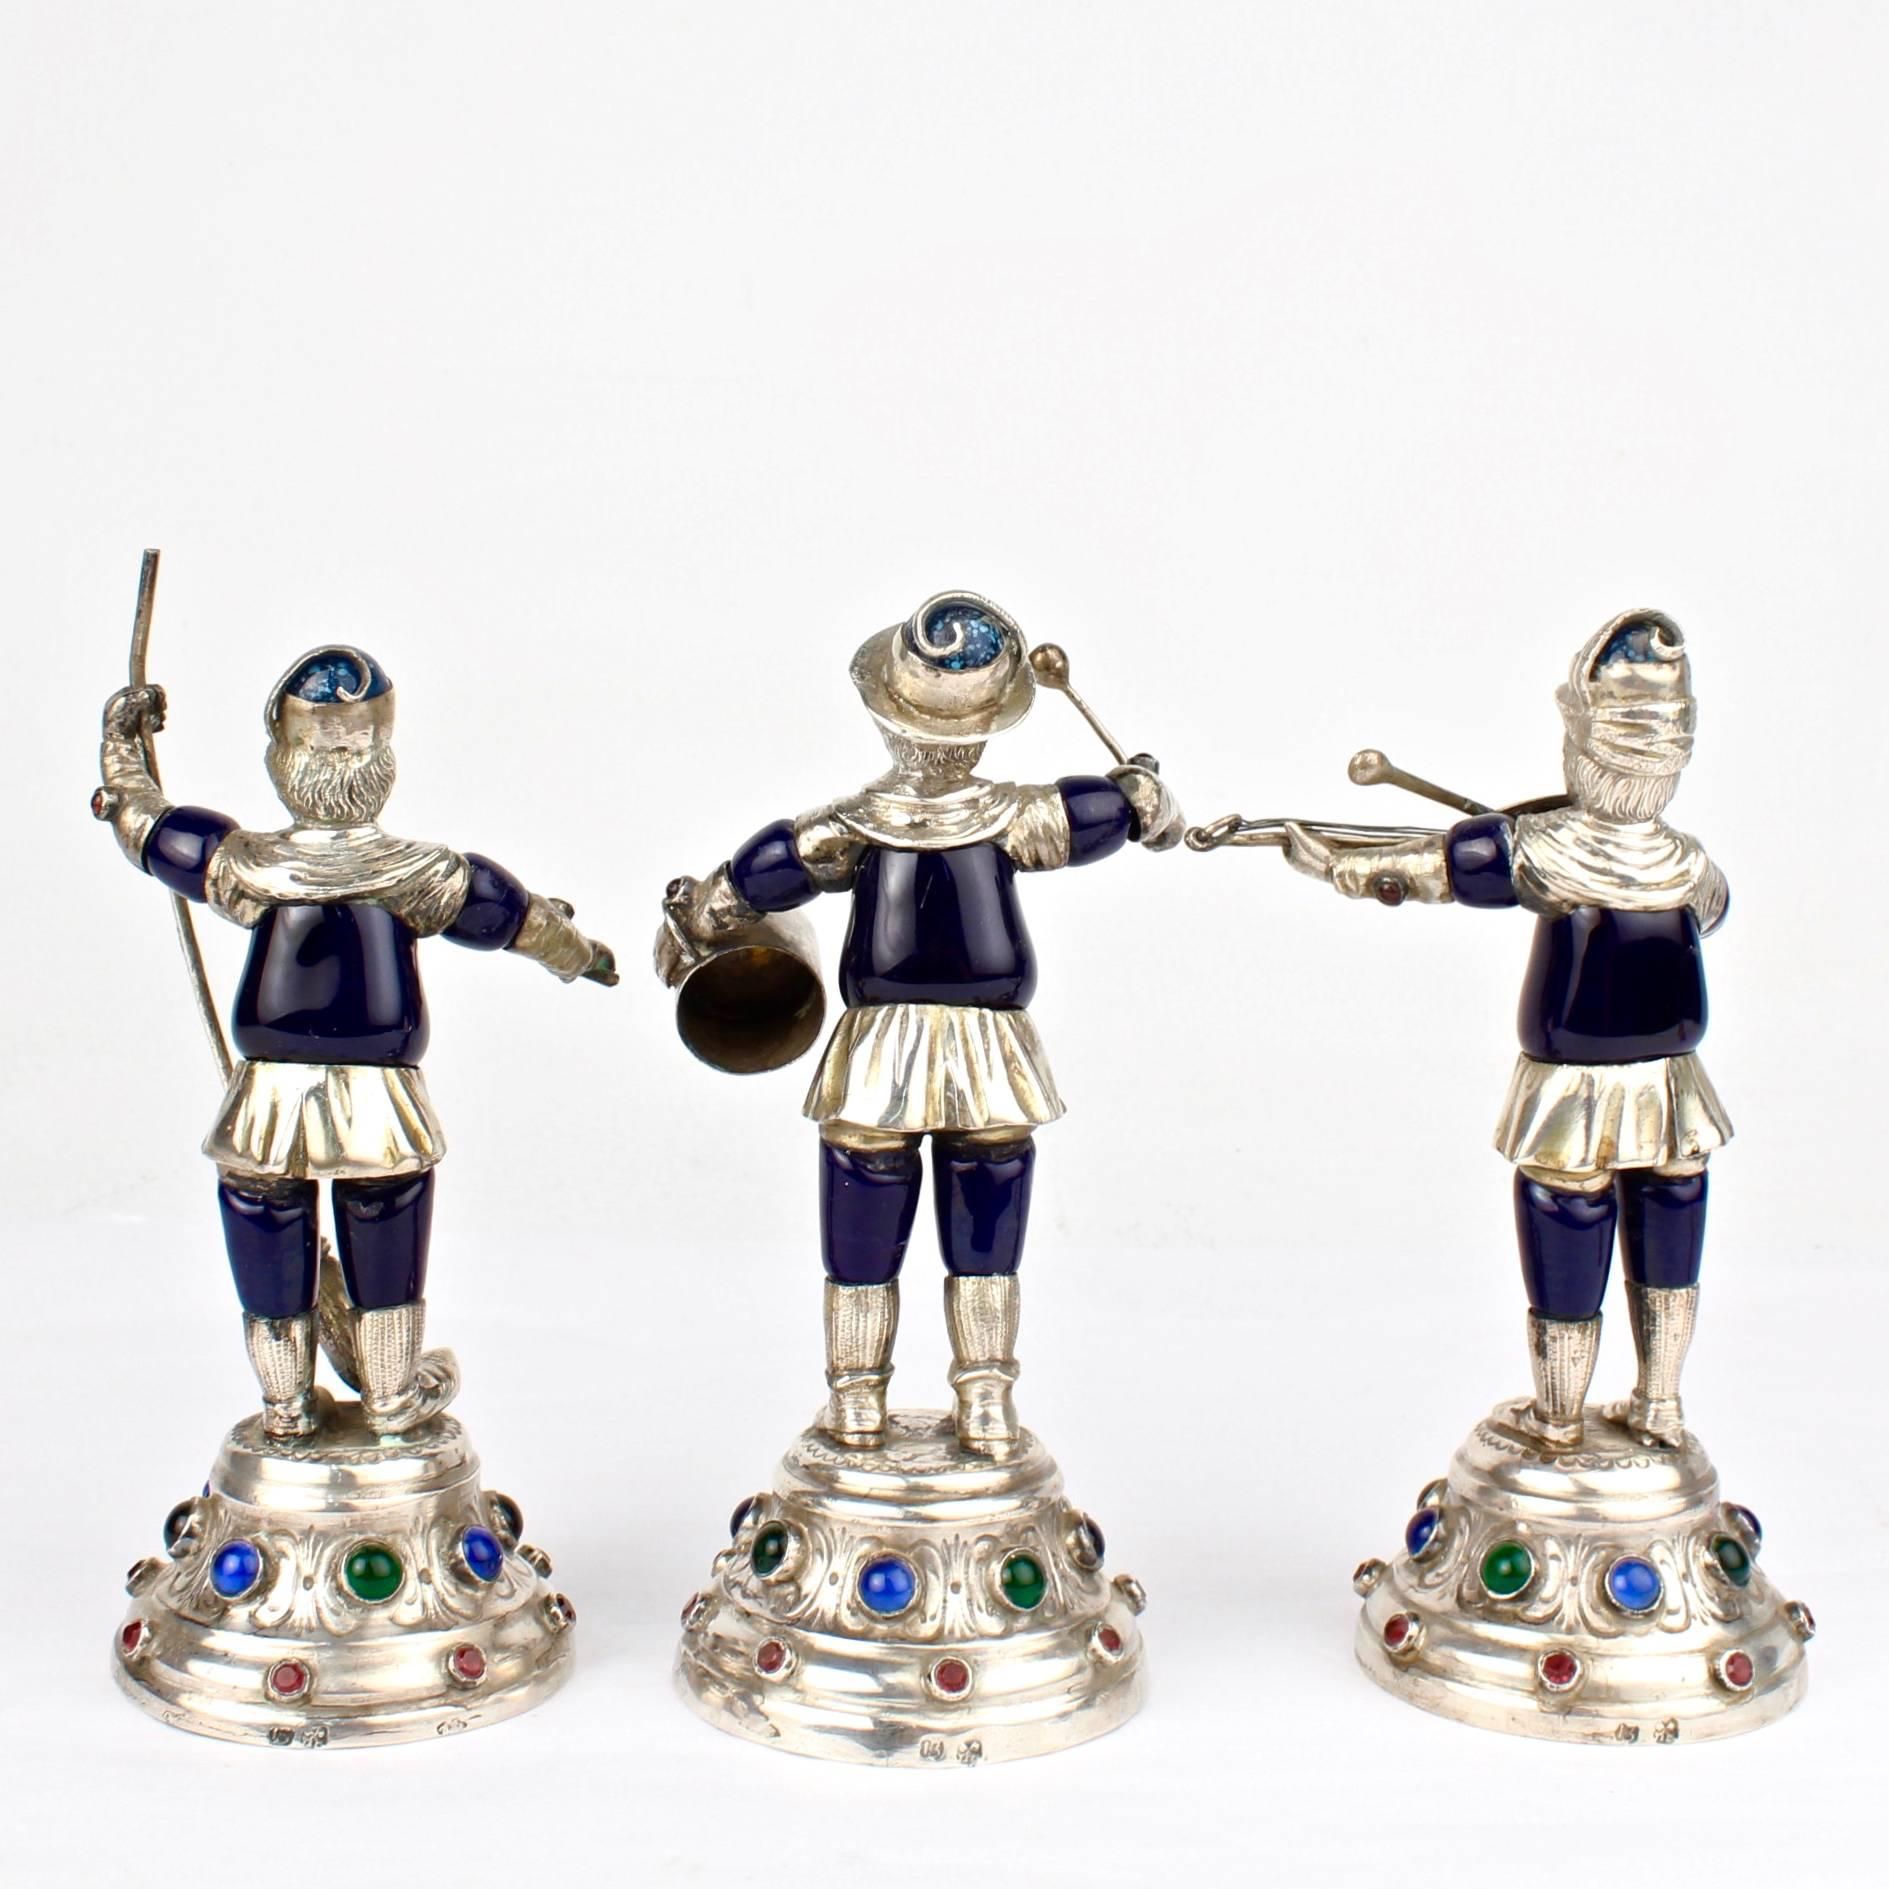 Three 19th Century Jeweled & Enameled German Coin Silver Musician Figurines In Good Condition For Sale In Philadelphia, PA